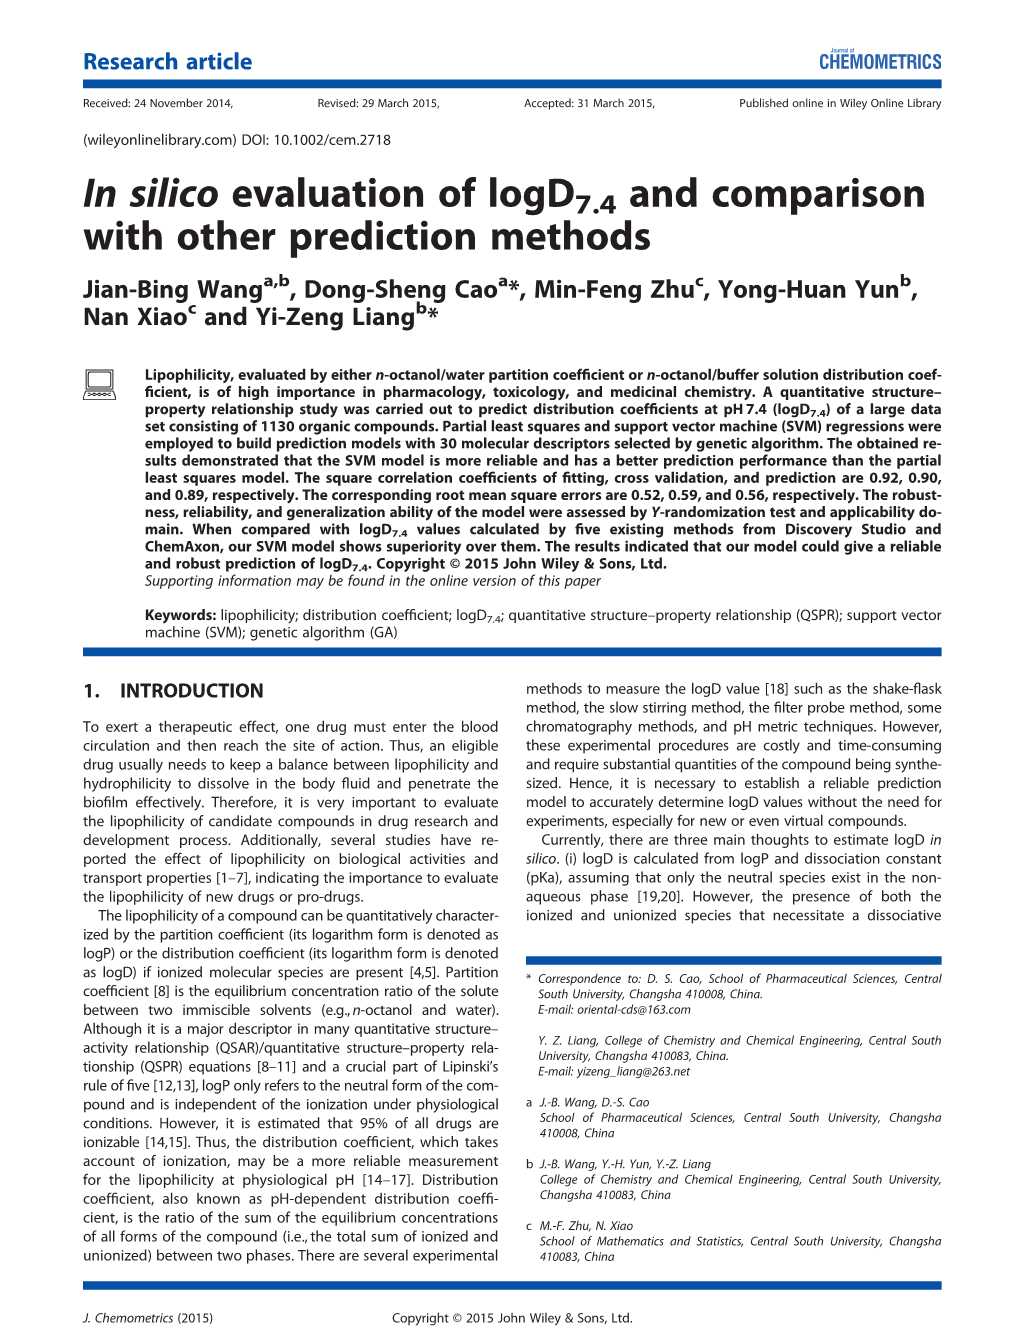 In Silico Evaluation of Logd7.4 and Comparison with Other Prediction